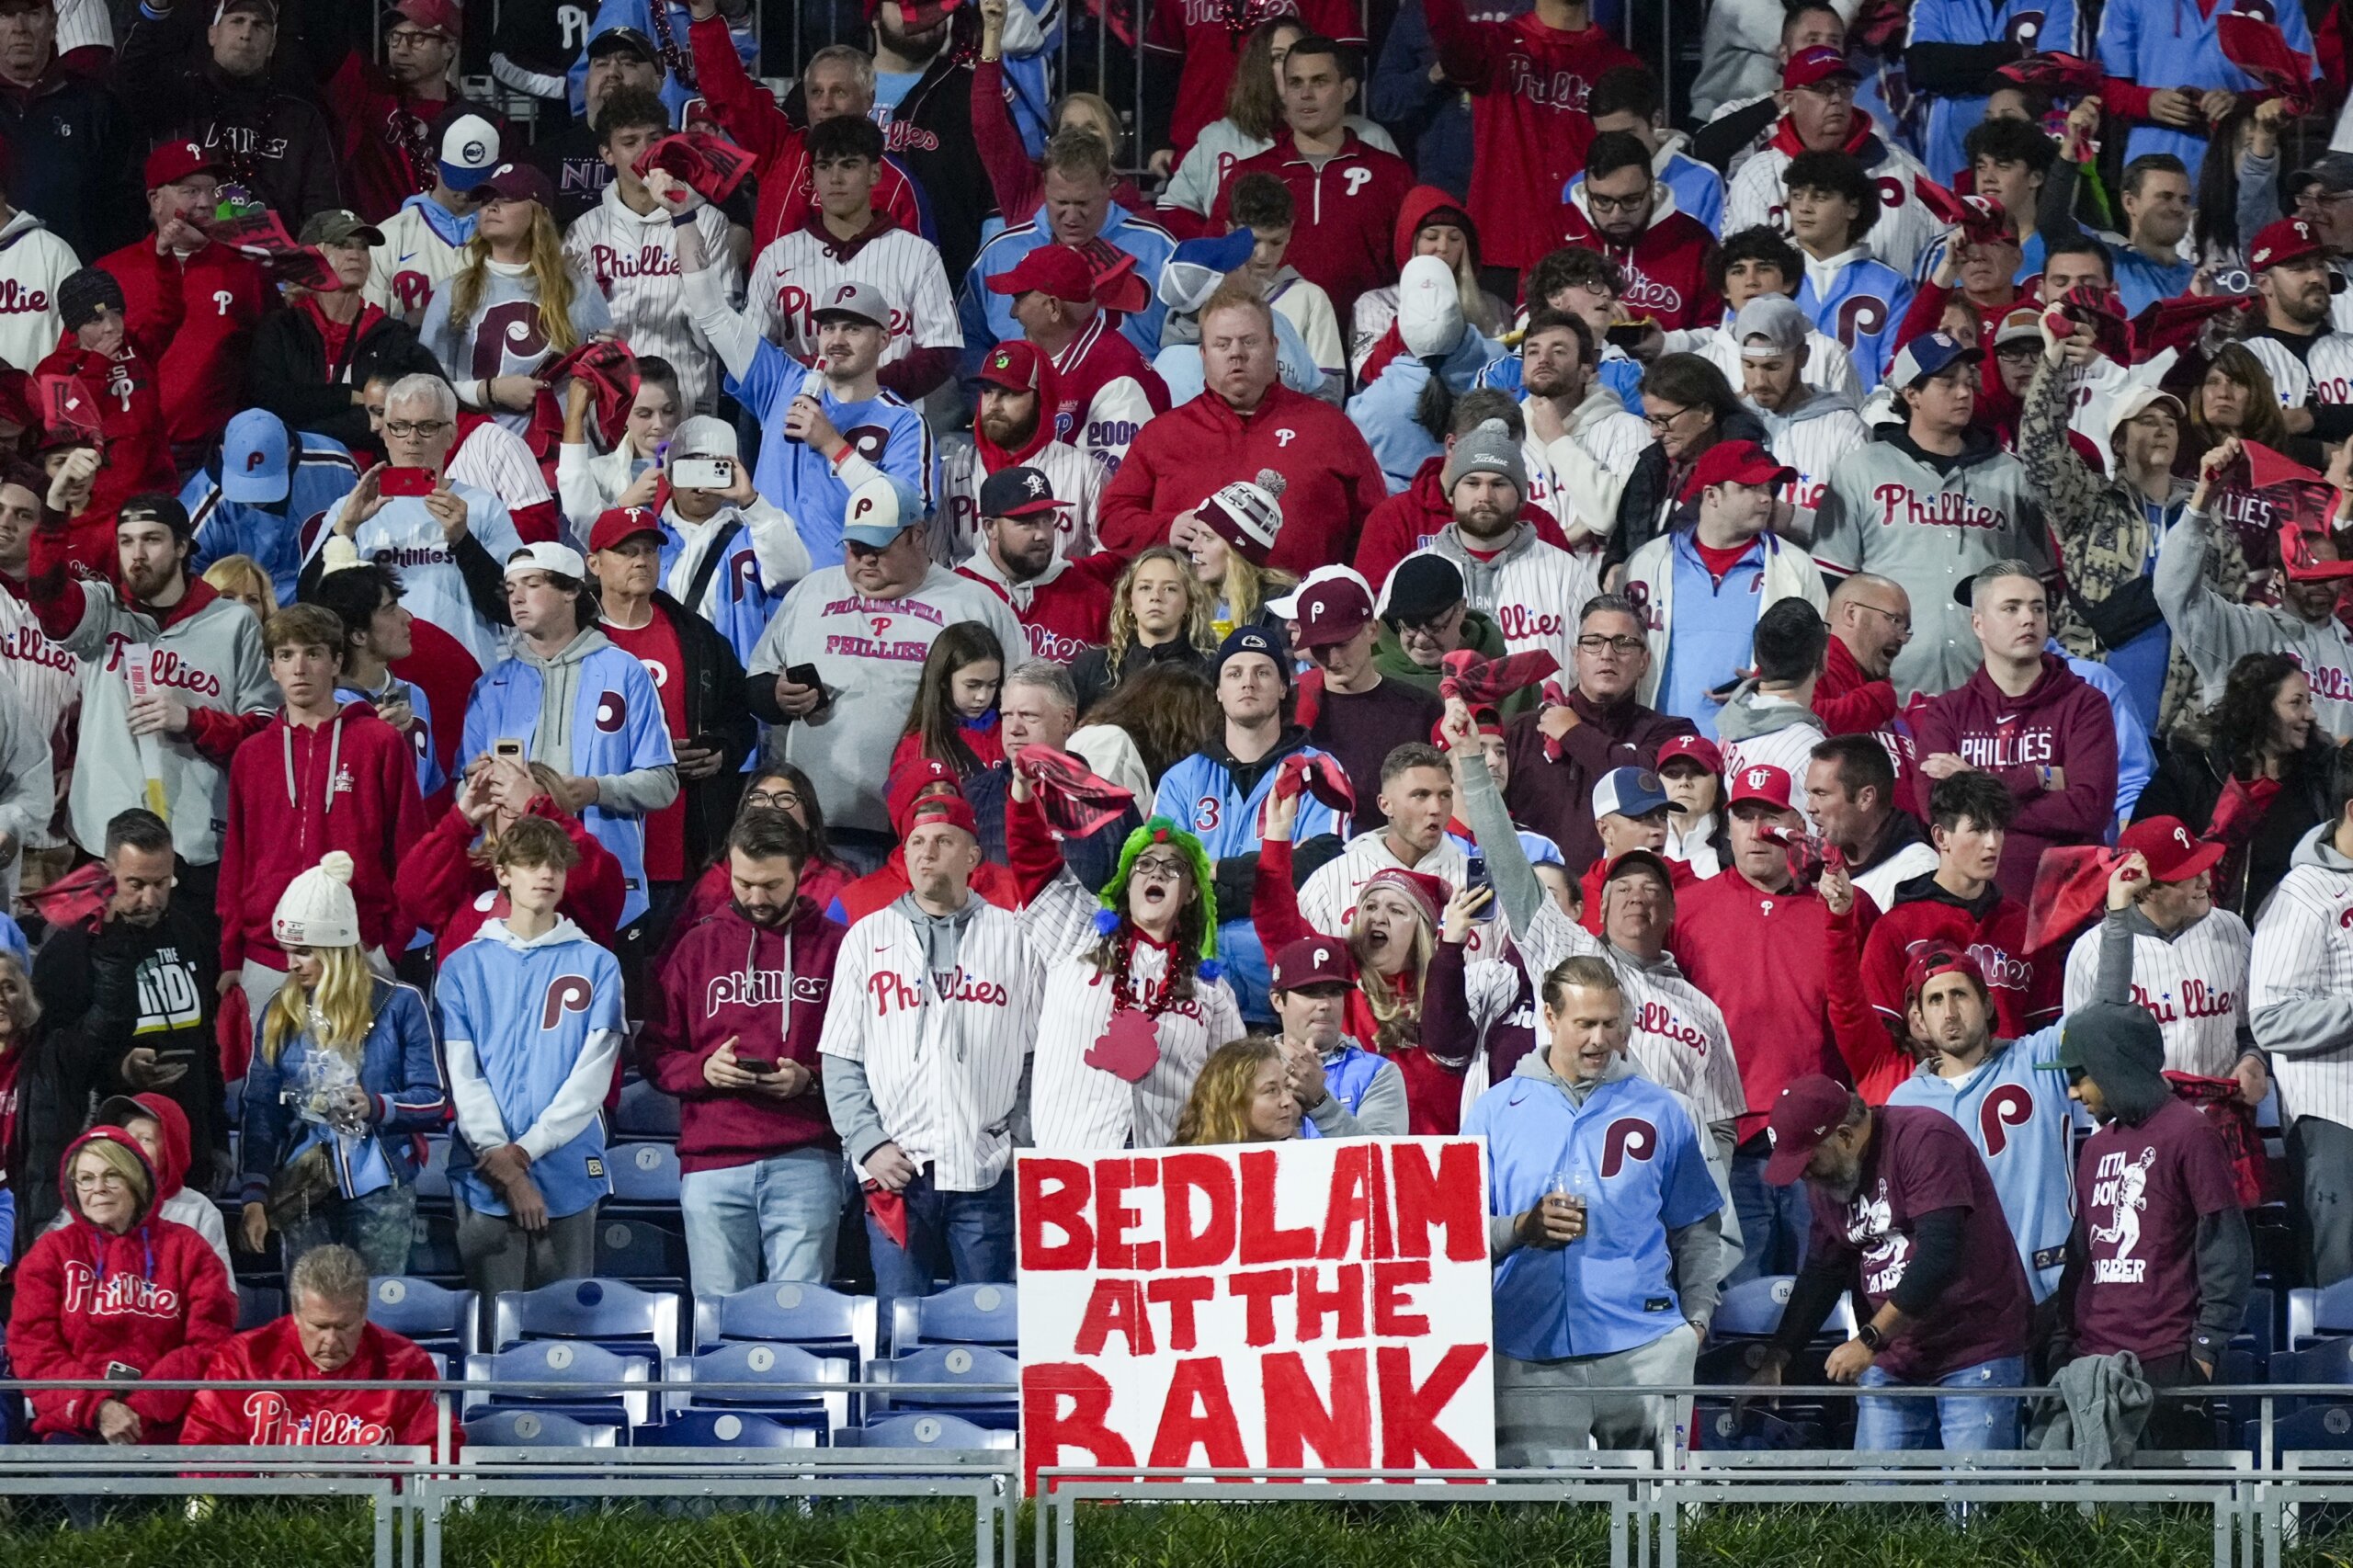 Down in Front!': A Few Pointers for Baseball's Worst Fans - The